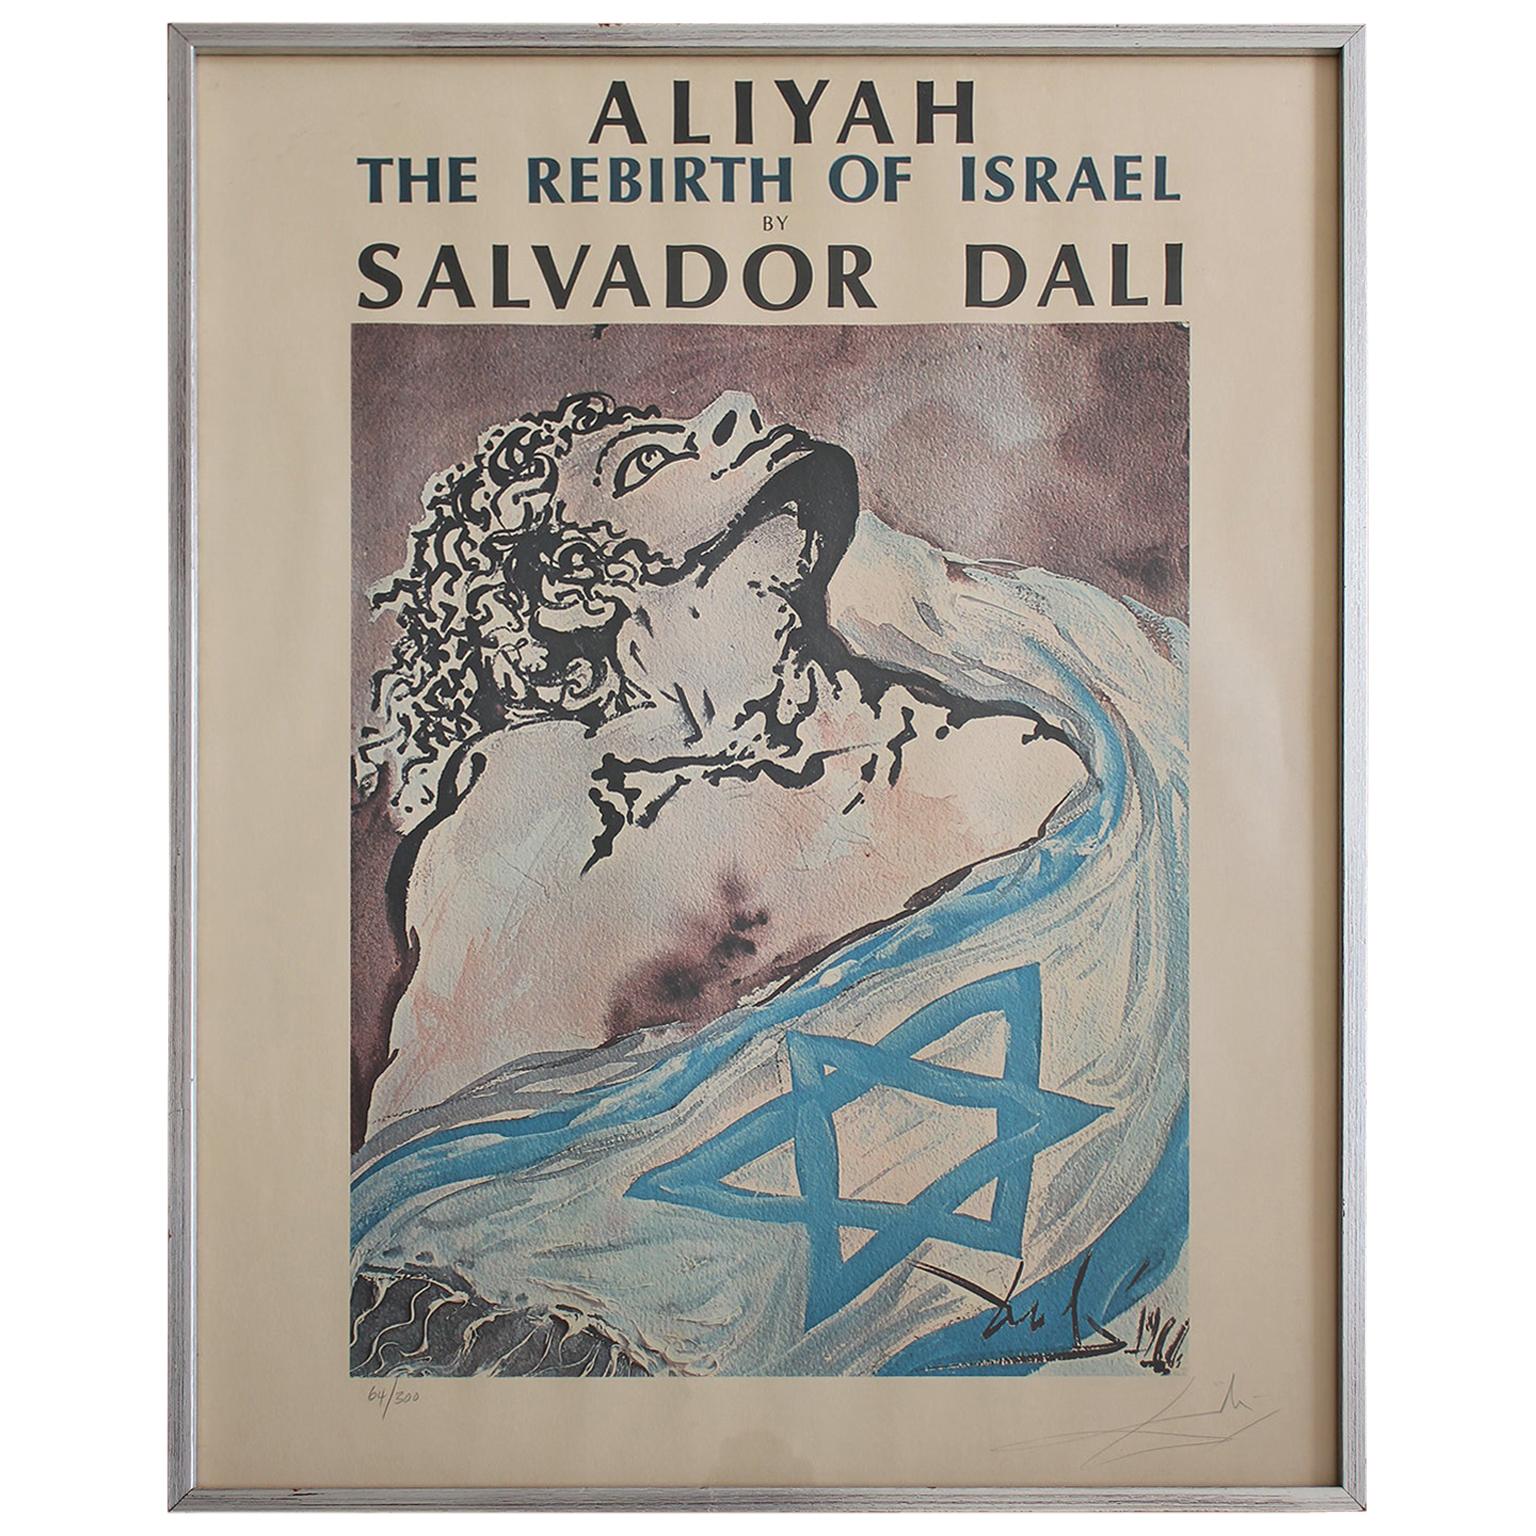 1968 Salvador Dali Hand Signed & Numbered Aliyah The Birth of Israel Lithograph